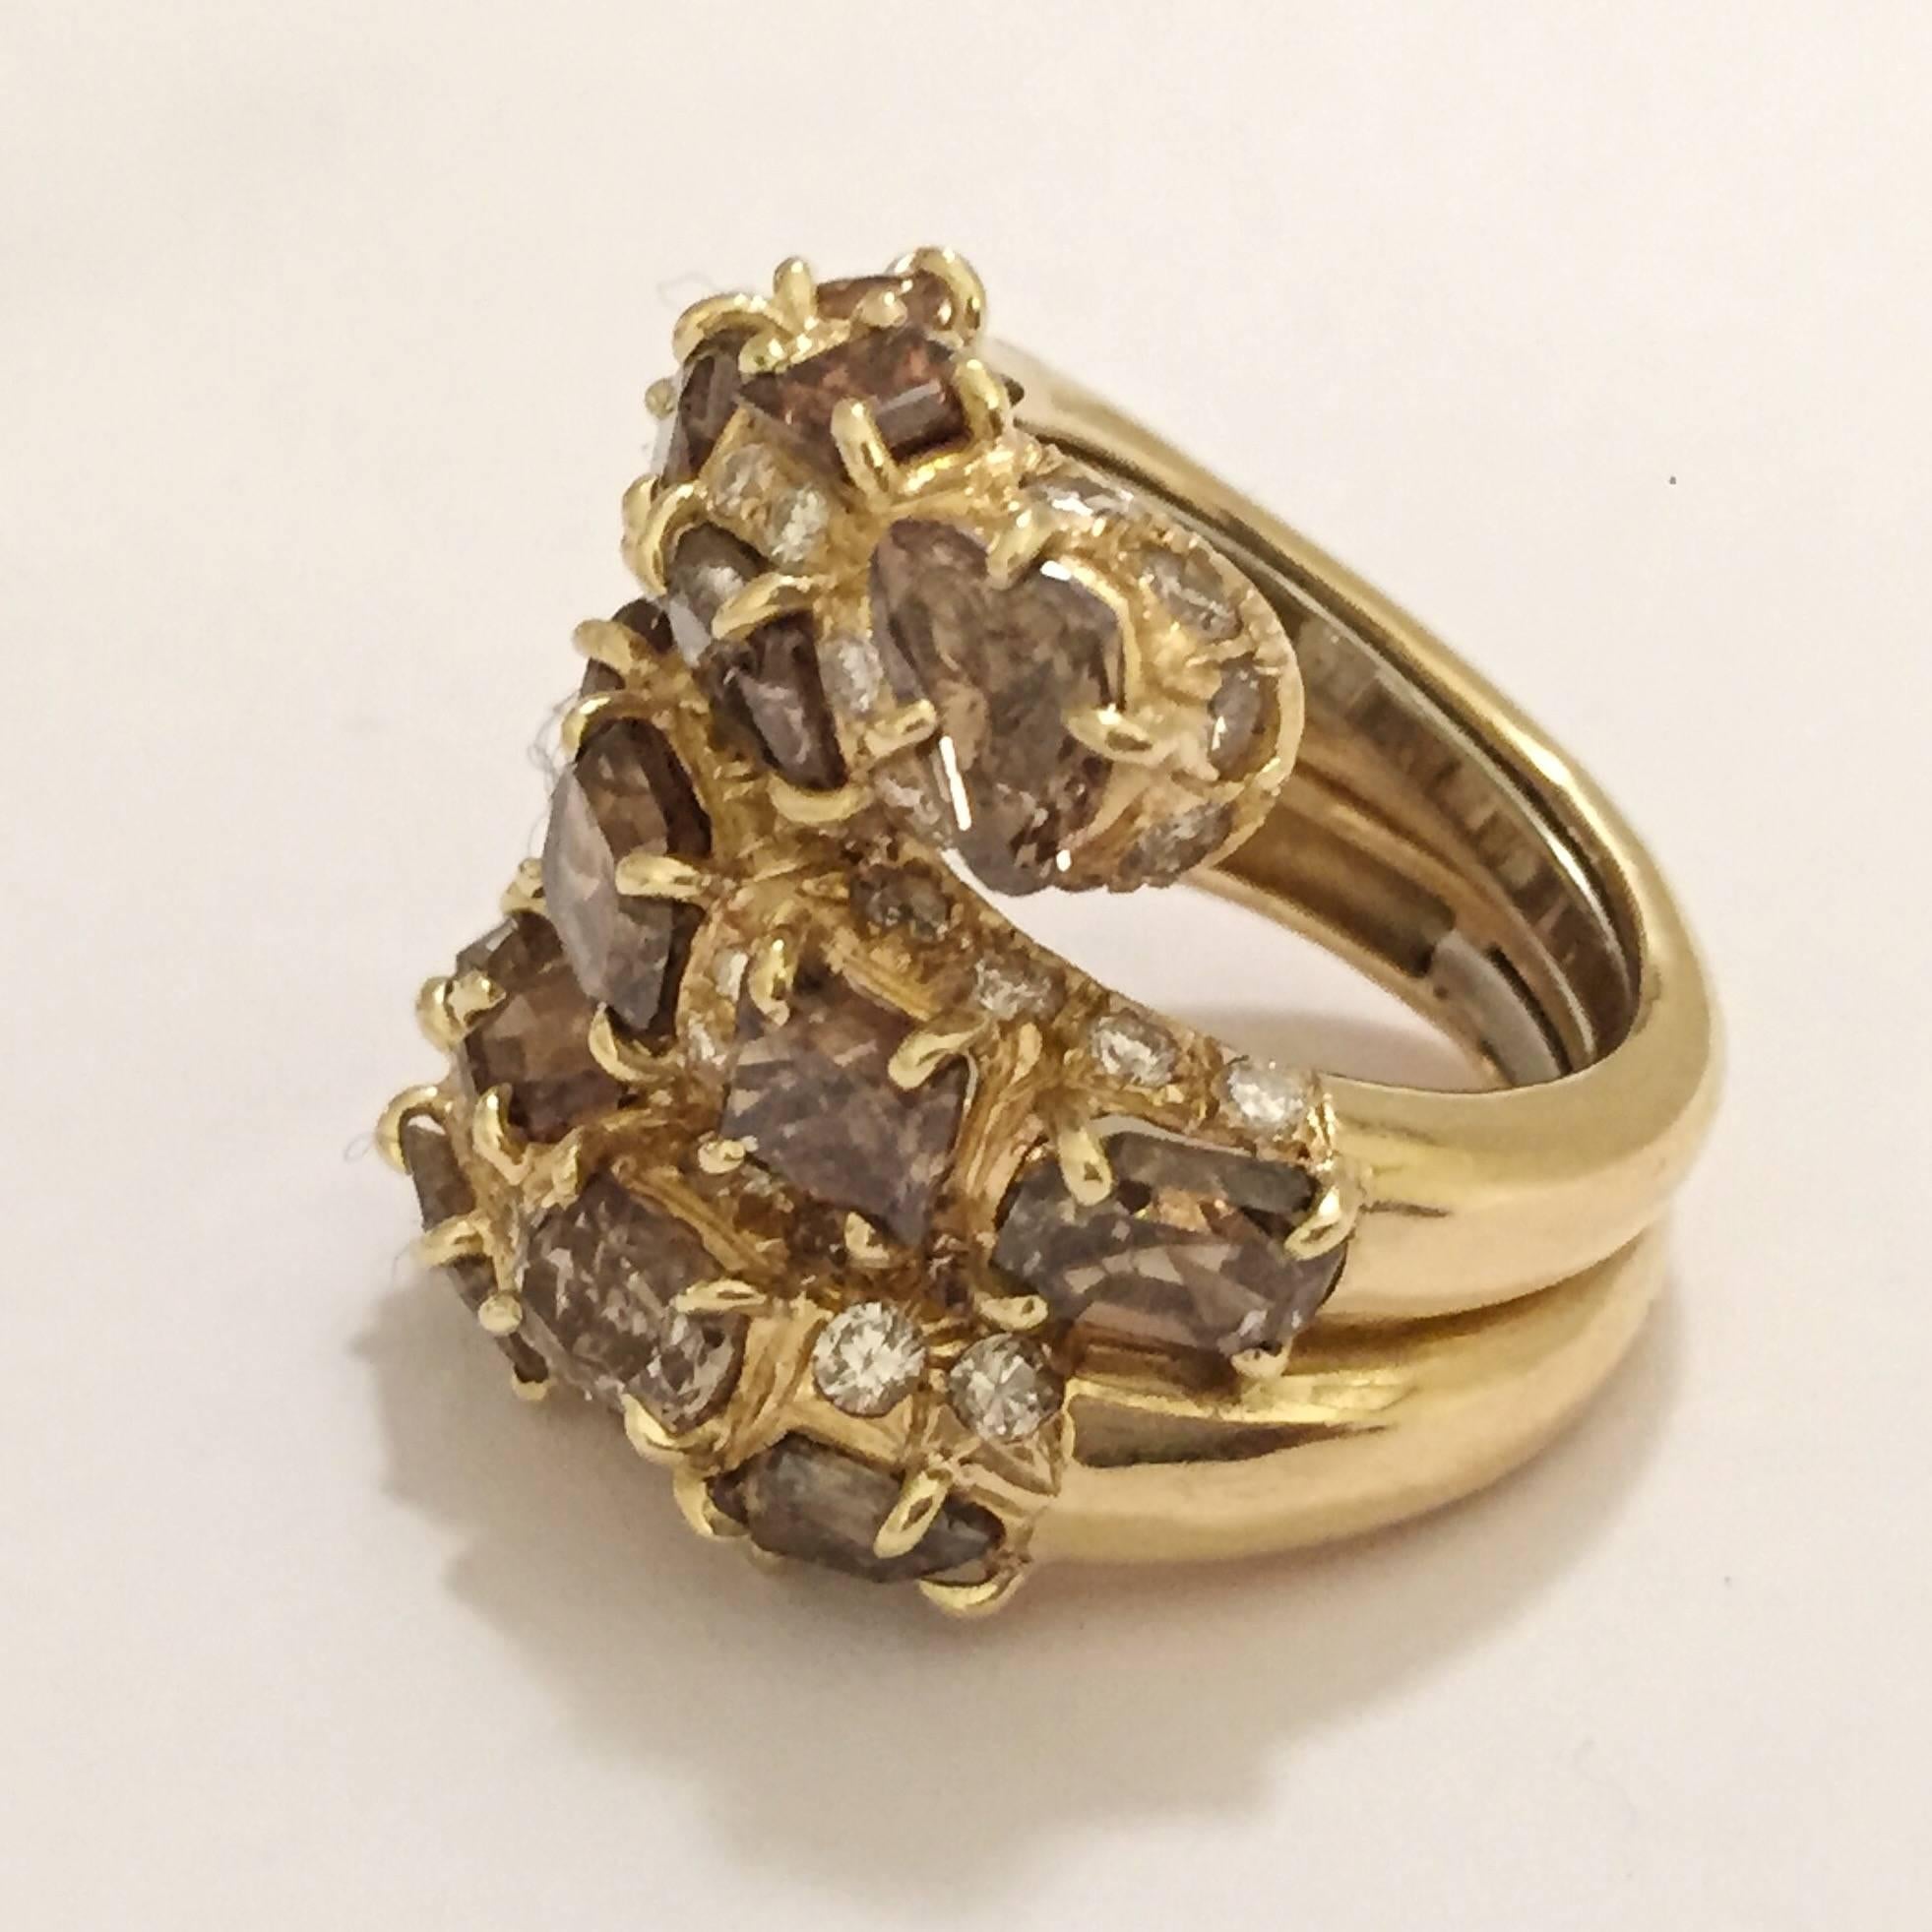 18kt Yellow Gold Modern Swirl Ring with multi shaped Brown Diamond slices and Round brilliant Brown Diamond Detail.  The Brown Diamond weight is approximately 13 carats total weight.    The Yellow Gold weight is approximately 14 dwt.

This is a